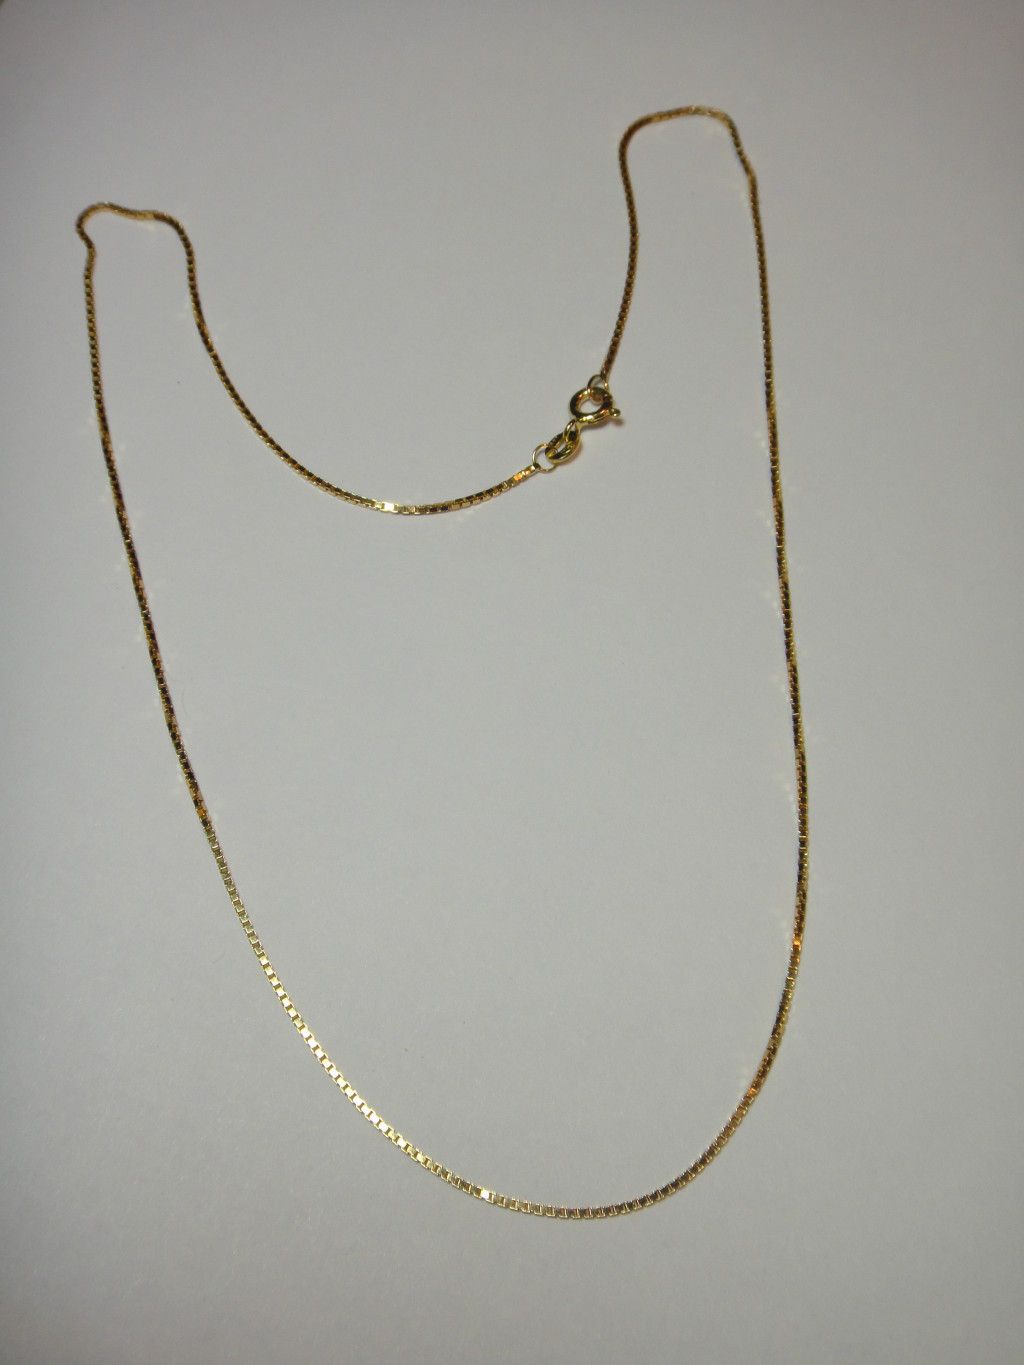 14K YELLOW GOLD BOX LINK PERFECT CHAIN FOR PENDANTS 16 INCH LONG N/R